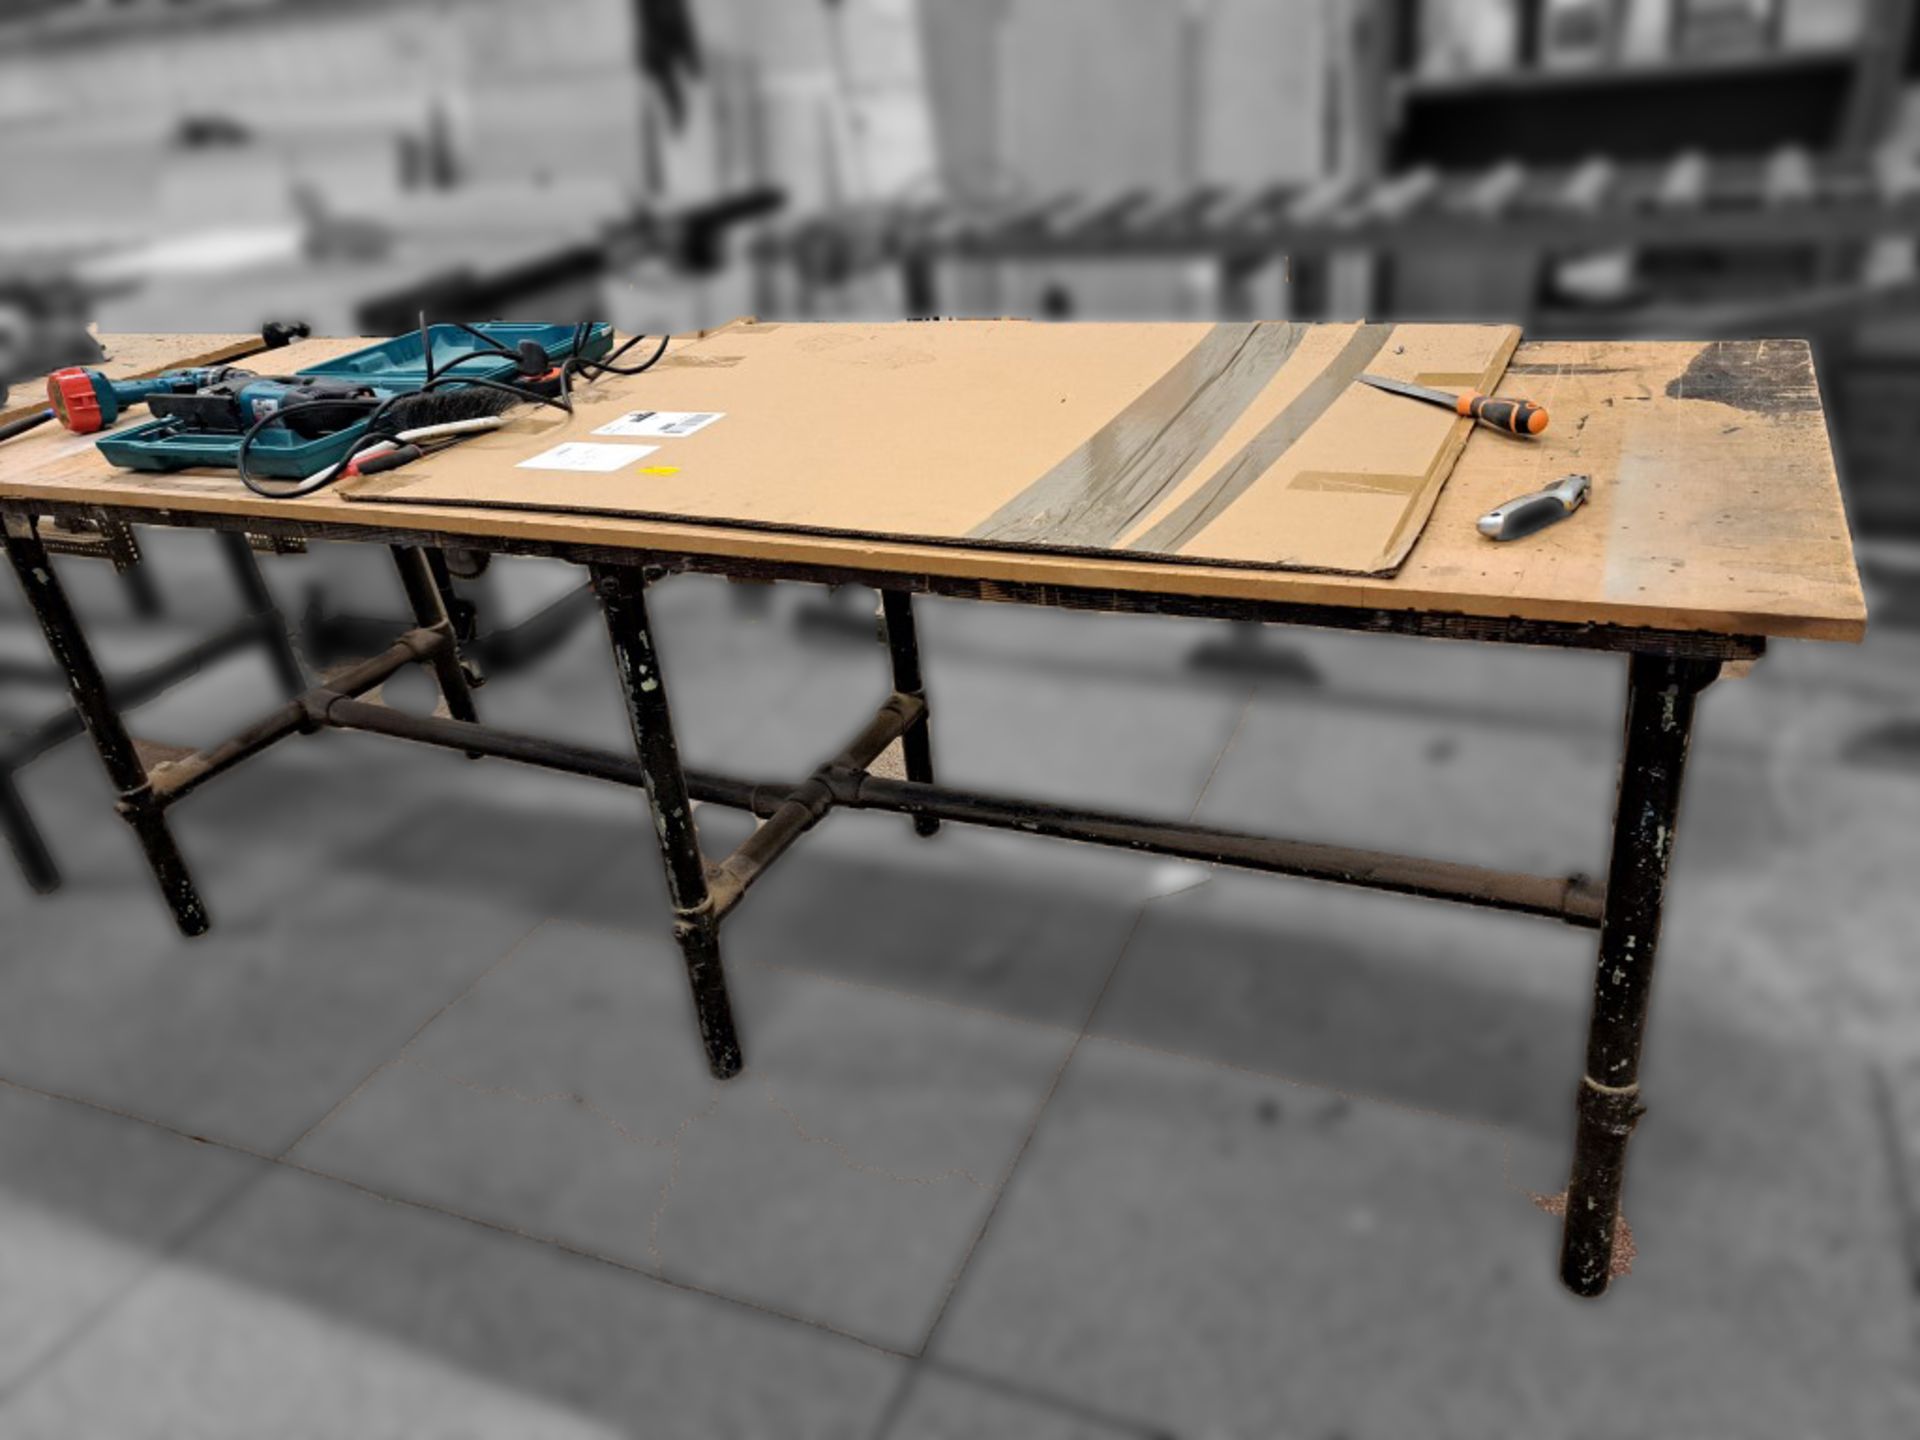 2 x Stand-alone Work Benches